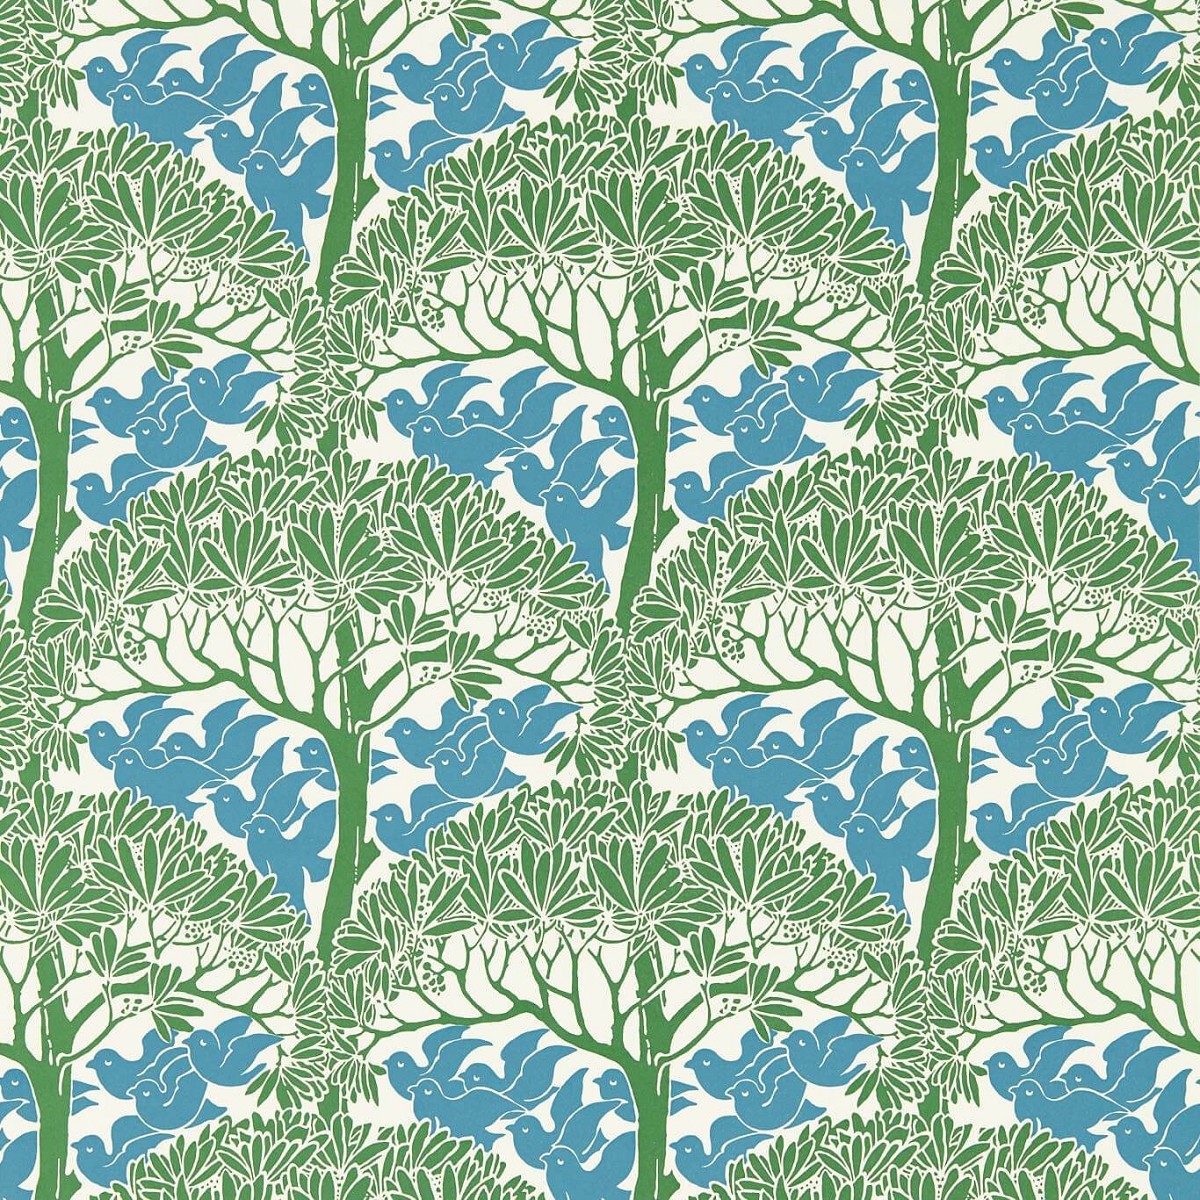 The Savaric Garden Green Fabric by William Morris & Co.